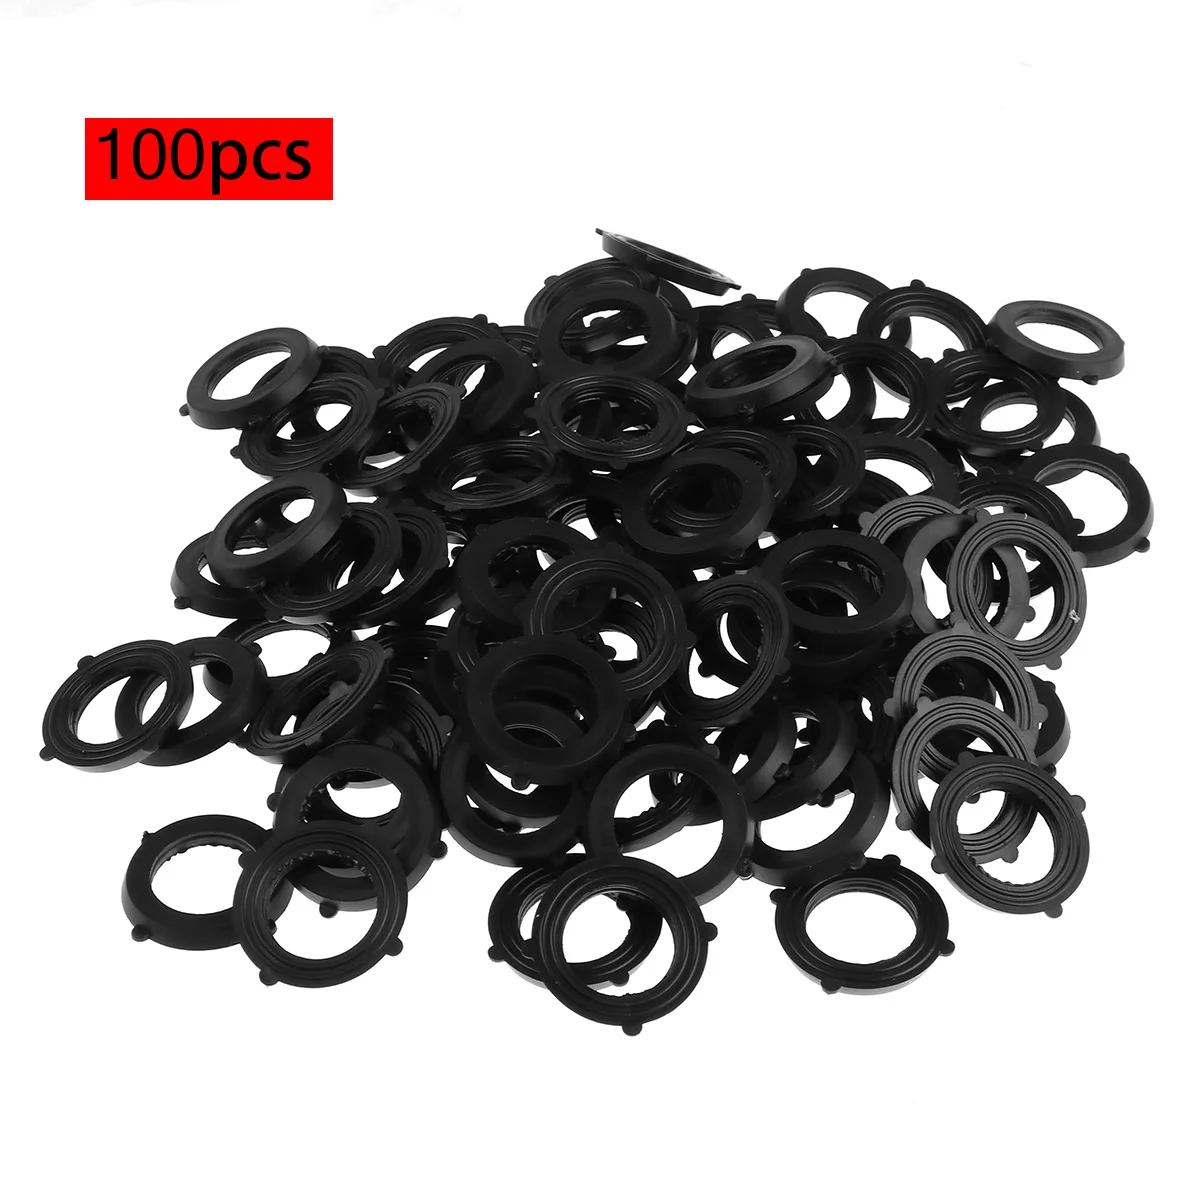 100Pcs Garden Hose Washers Rubber O-Ring Seals Self Locking Tabs for 3/4 or 1/2 Inch Garden Shower Hose and Water Faucets